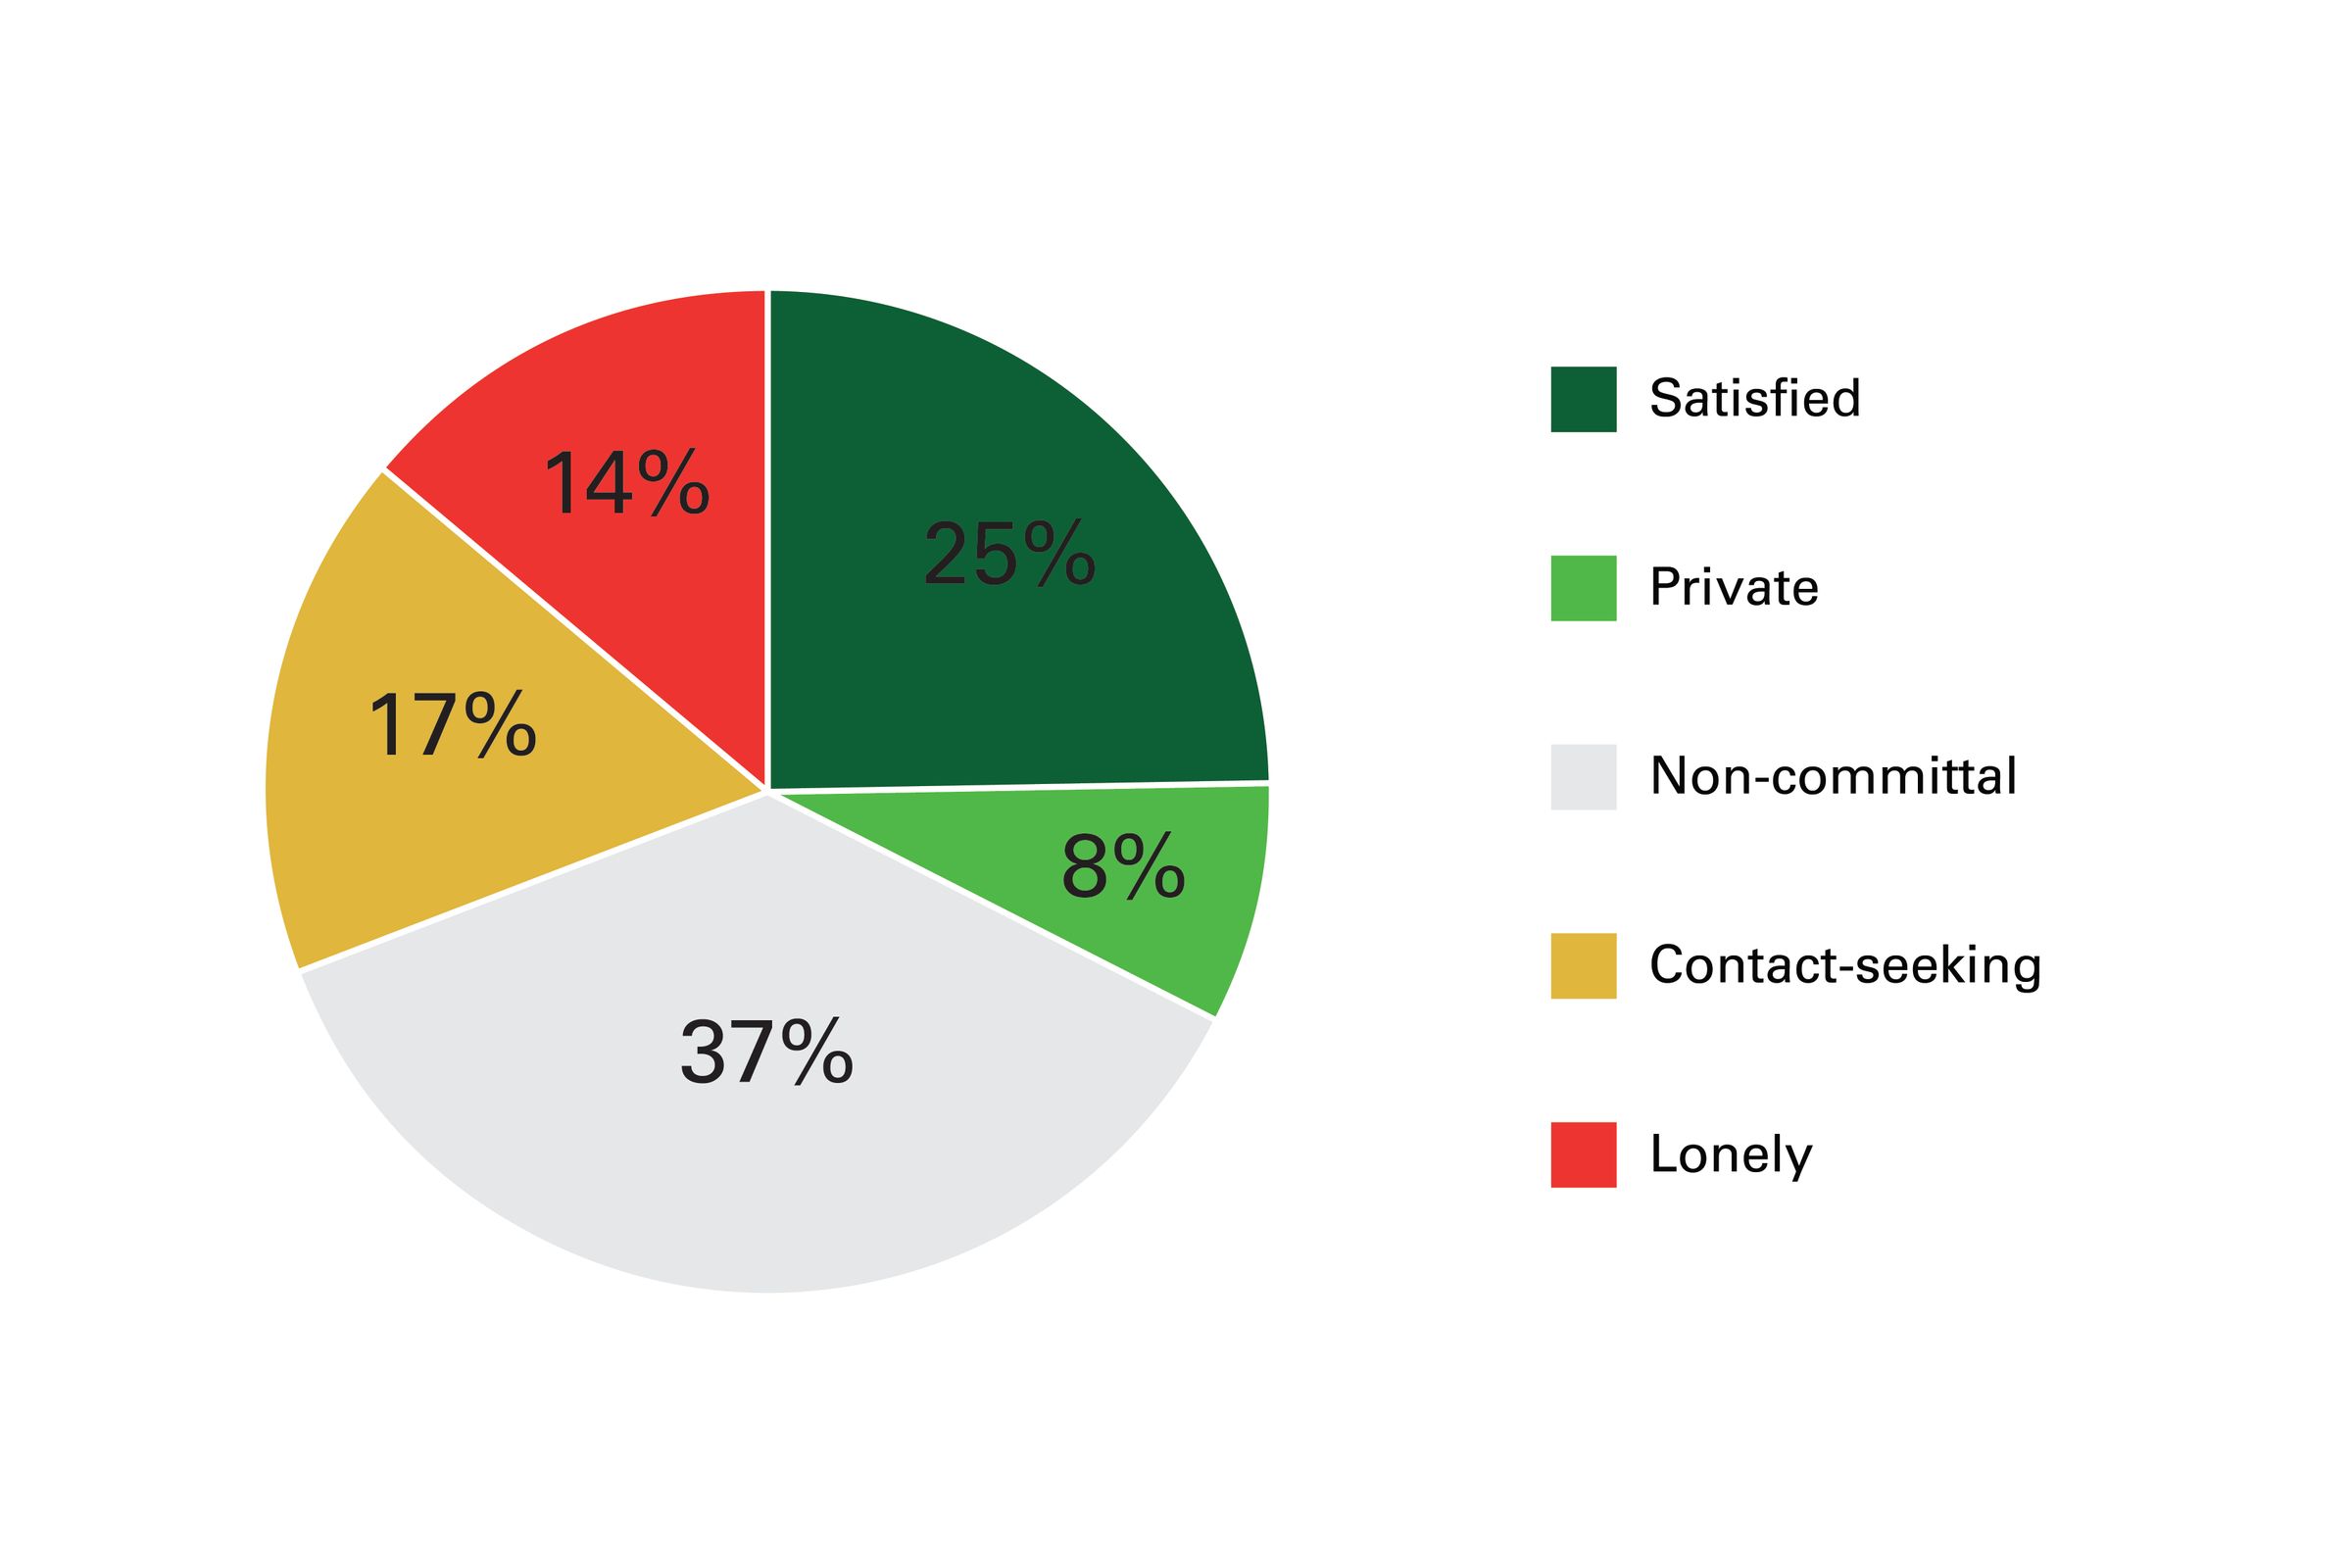 Pie charts displaying the results of the survey on satisfaction with local social connection. 25 percent of participants are satisfied, have enough contact and do not feel isolated. 8 percent answered private, meaning they are isolated but have enough contact. 37 percent answered non-committal, 17% of participants are contact-seeking and 14 percent are lonely